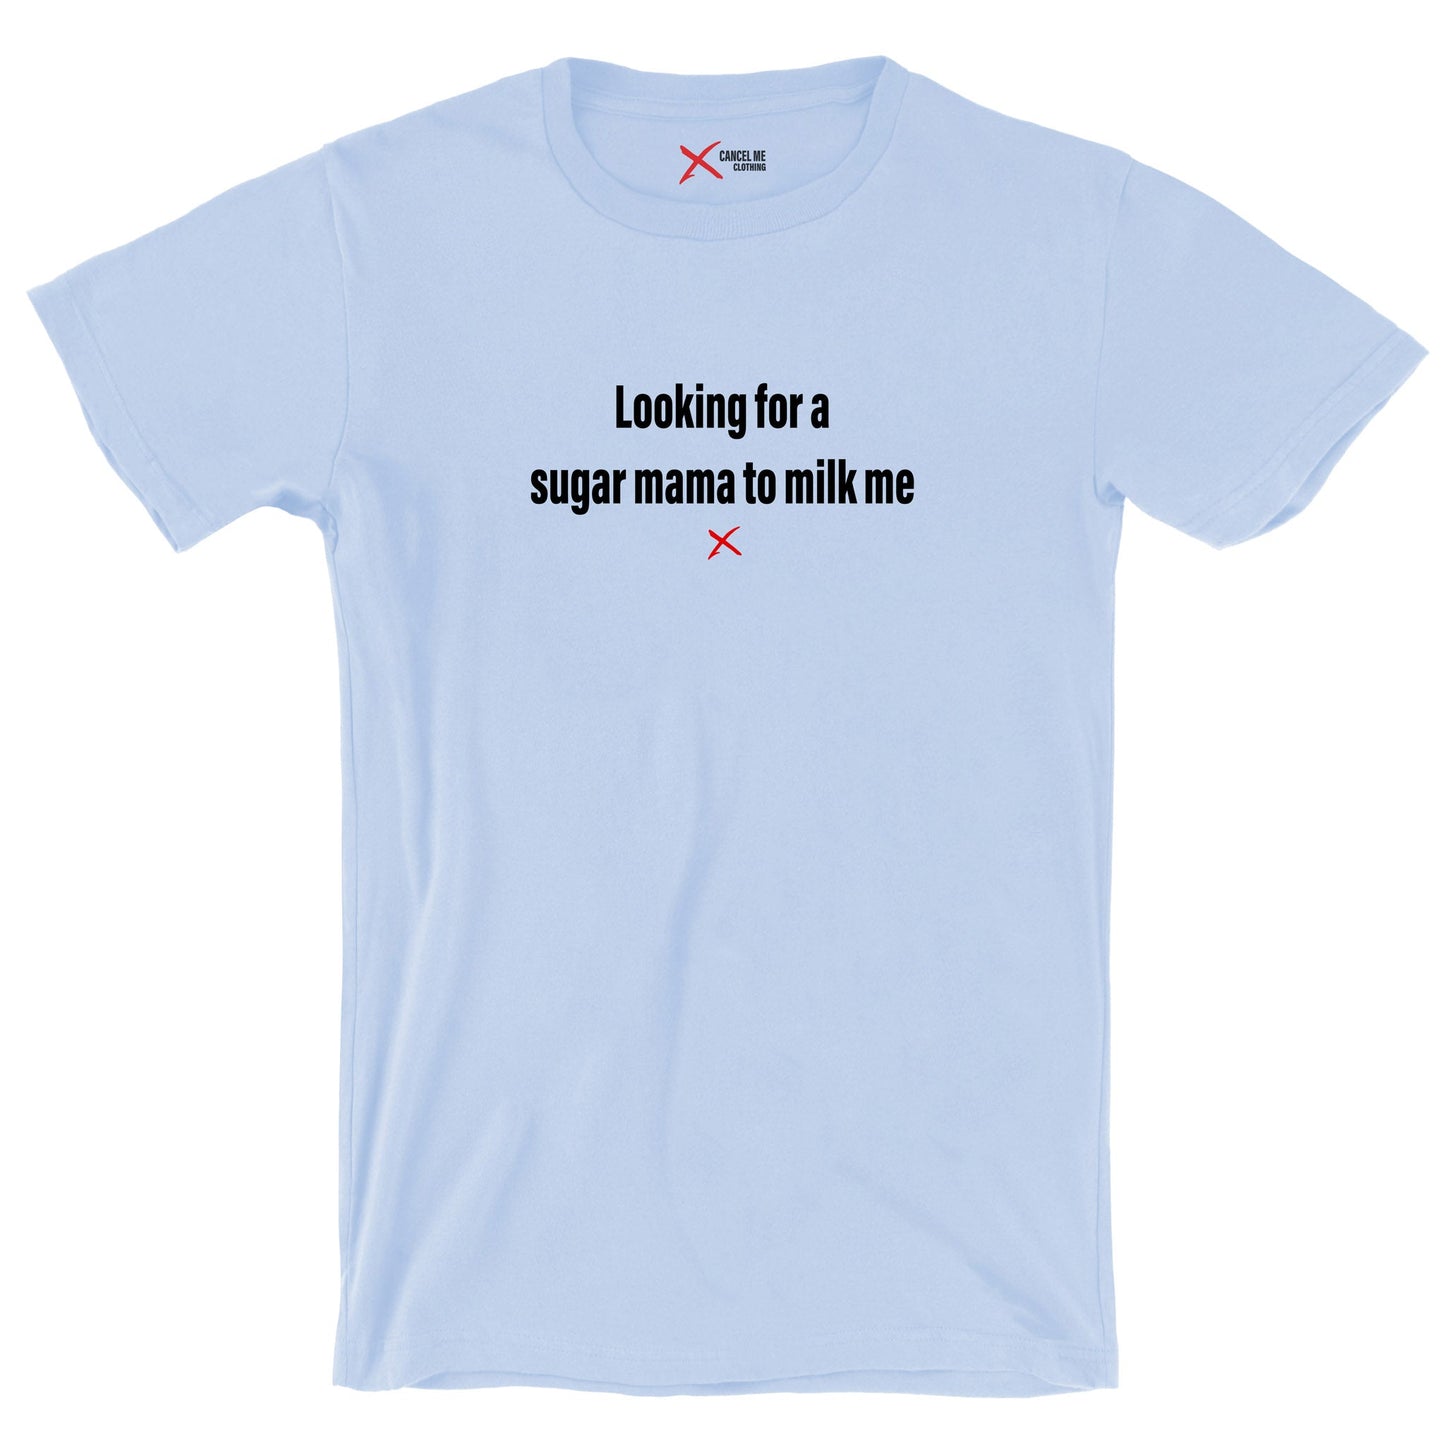 Looking for a sugar mama to milk me - Shirt